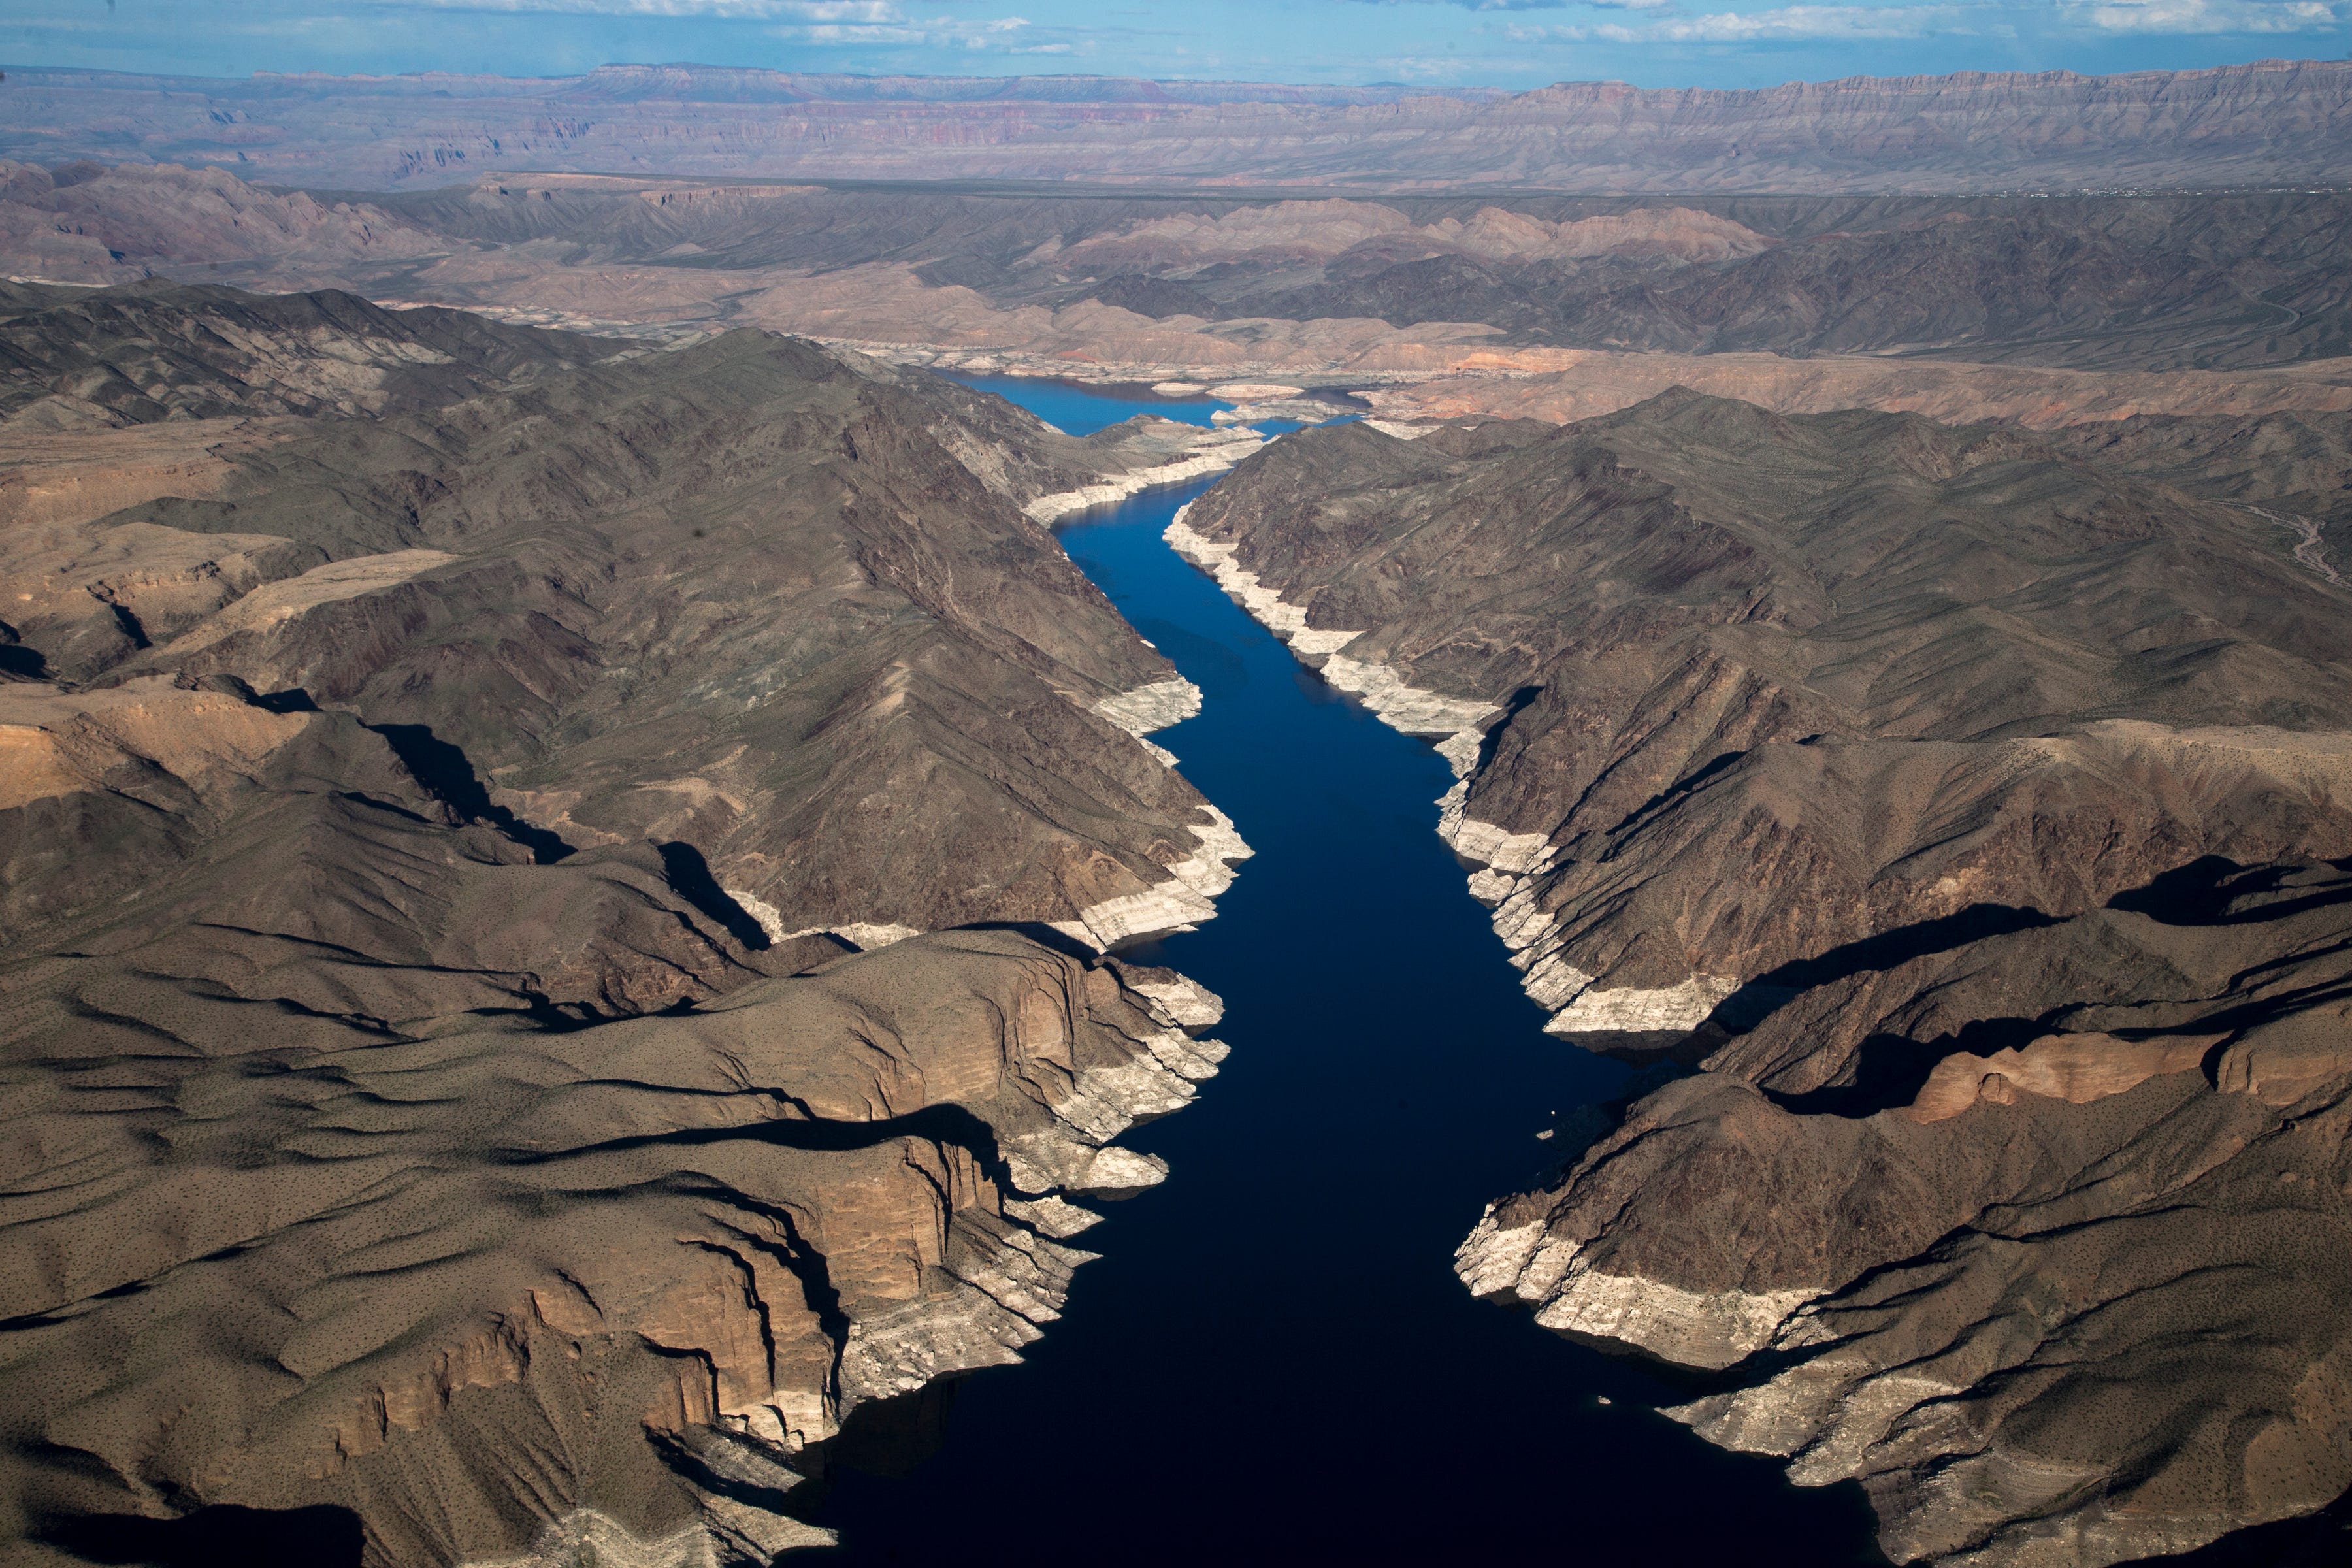 Lake Mead shows the effects of a prolonged drought, which has reduced the flow of the Colorado River. The high-water mark, or white bathtub ring, shows how far water levels have fallen.